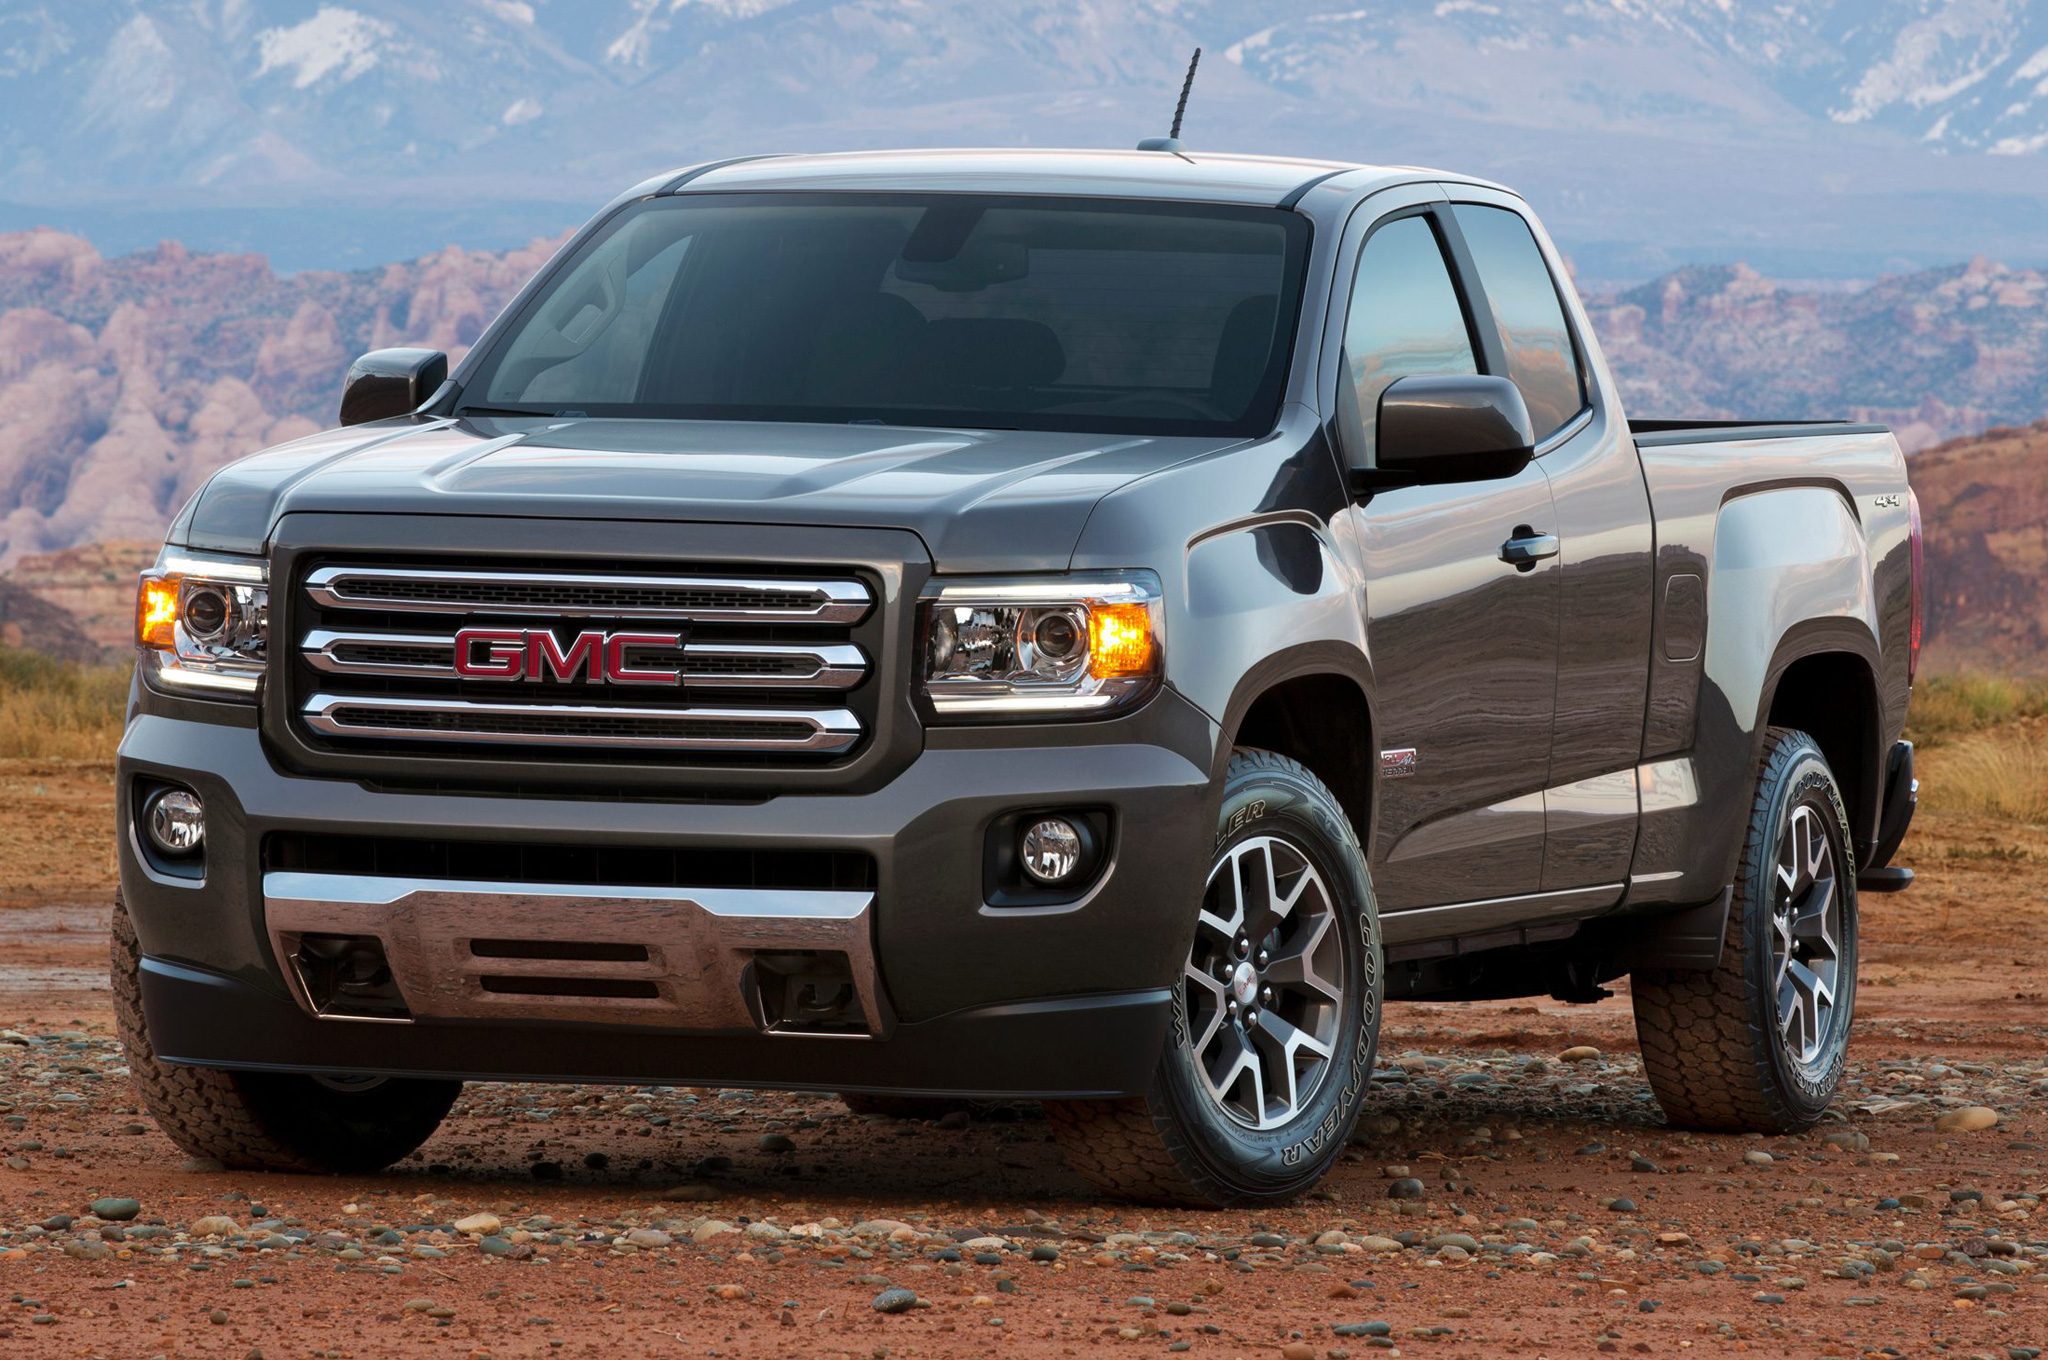 2015-gmc-canyon-front-view.jpg